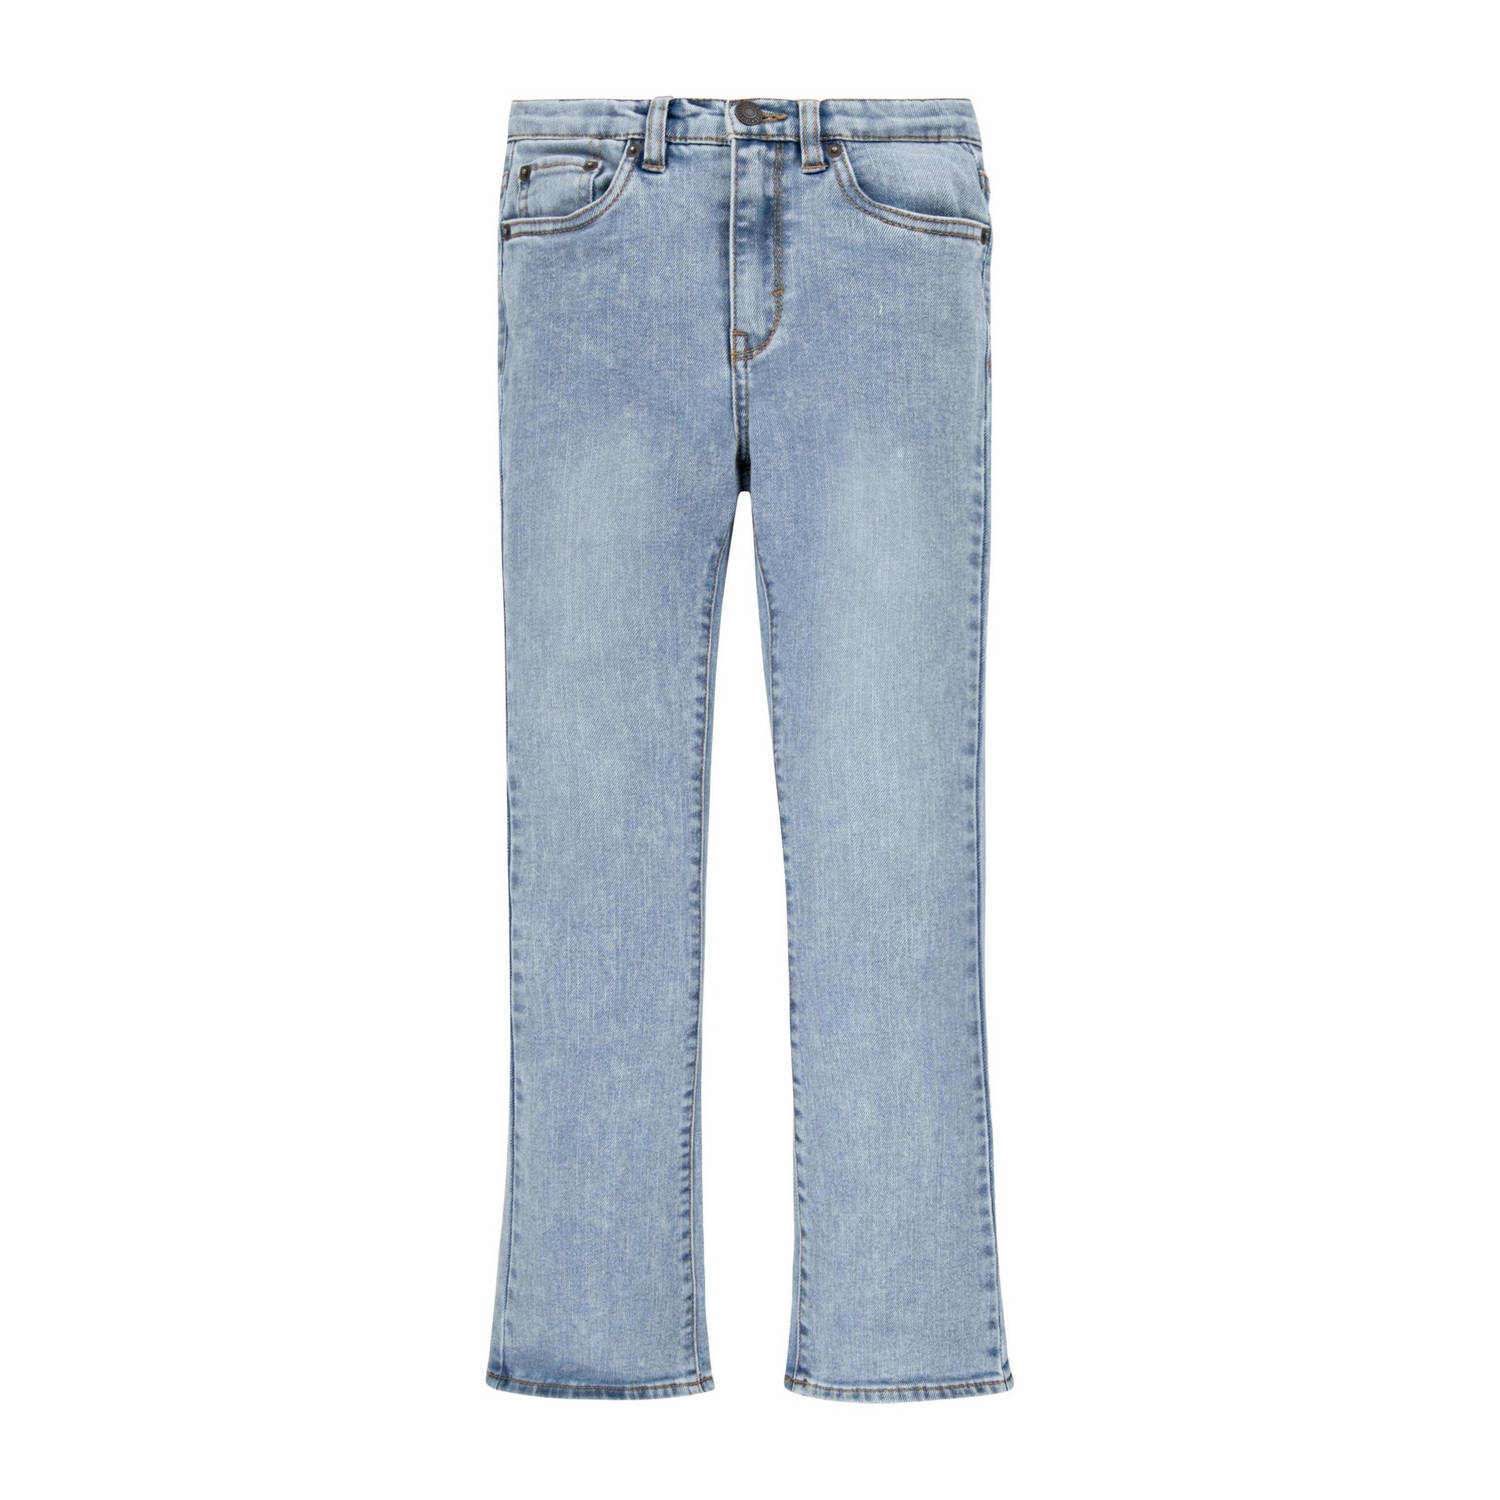 Levi's Kids 726 high waist flared jeans be cool without destruction